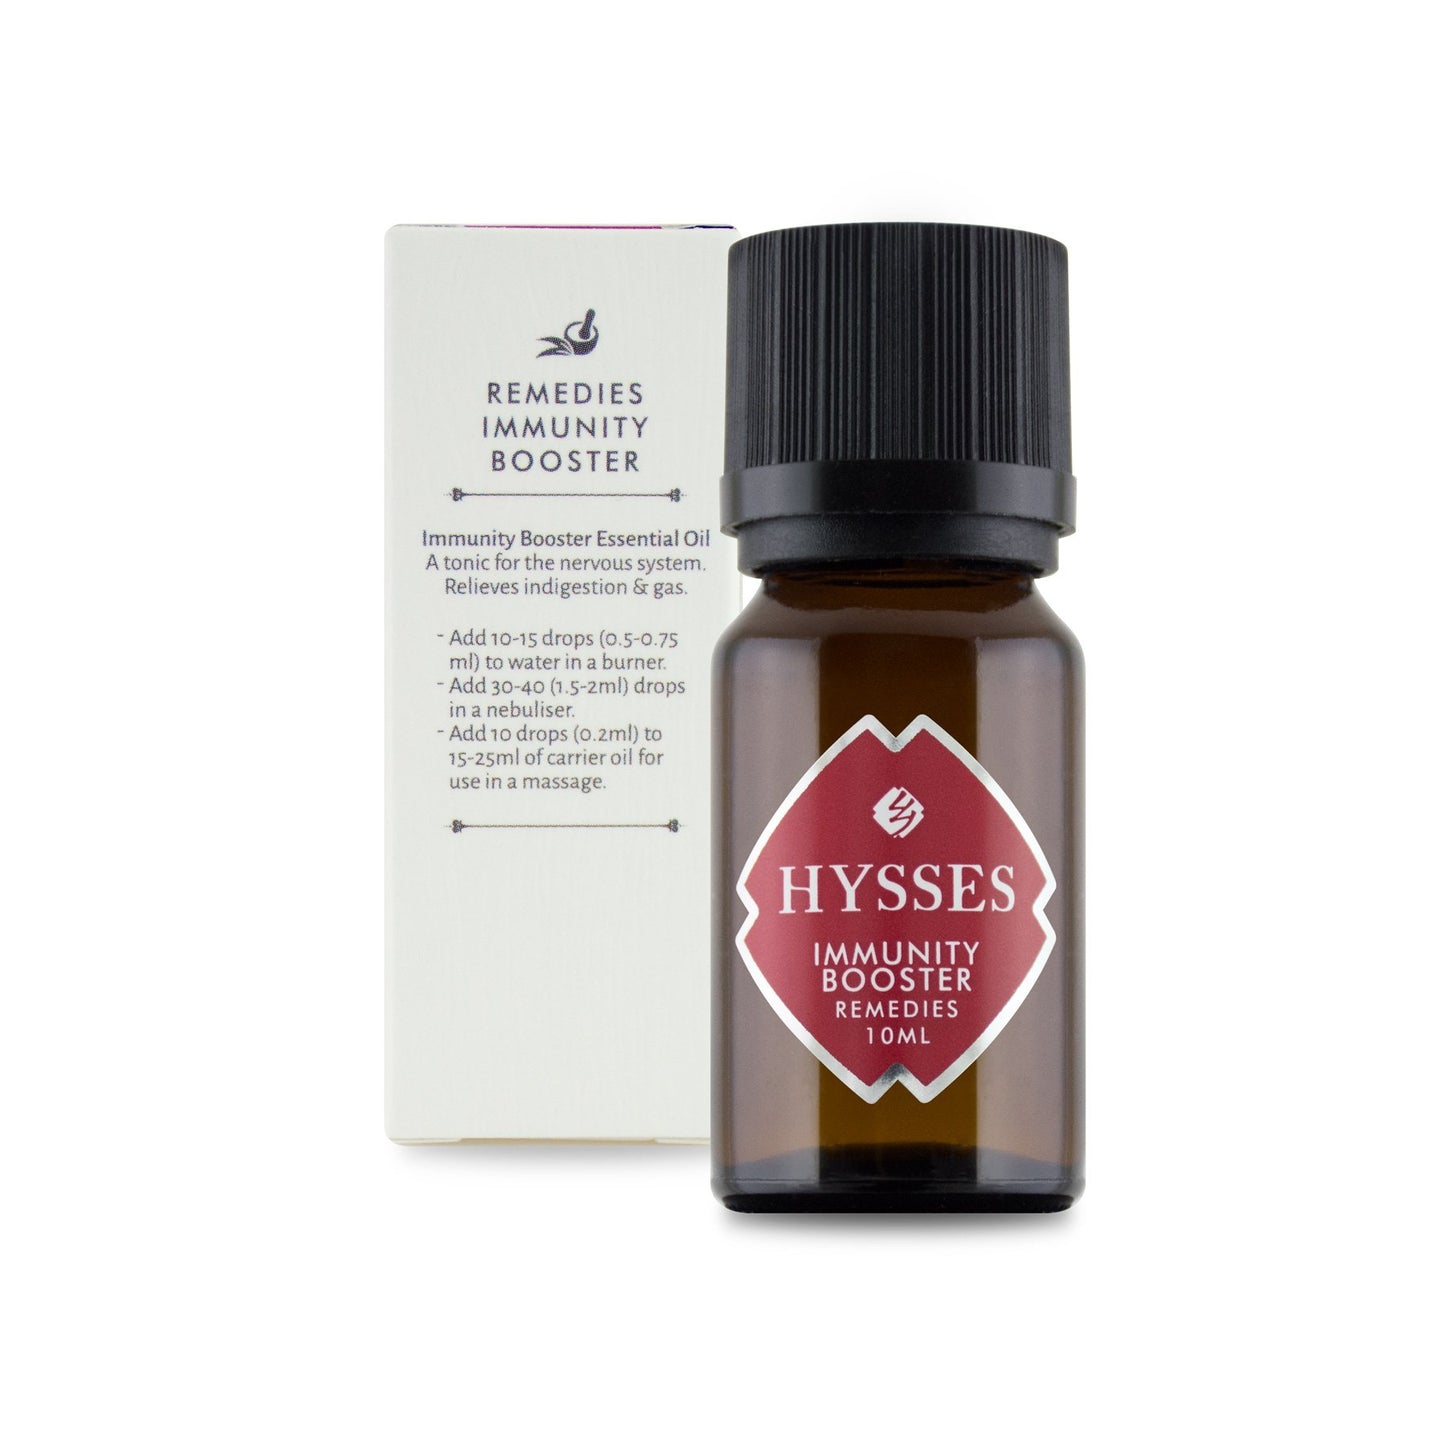 Hysses Essential Oils, Remedies Collection - Immunity Booster